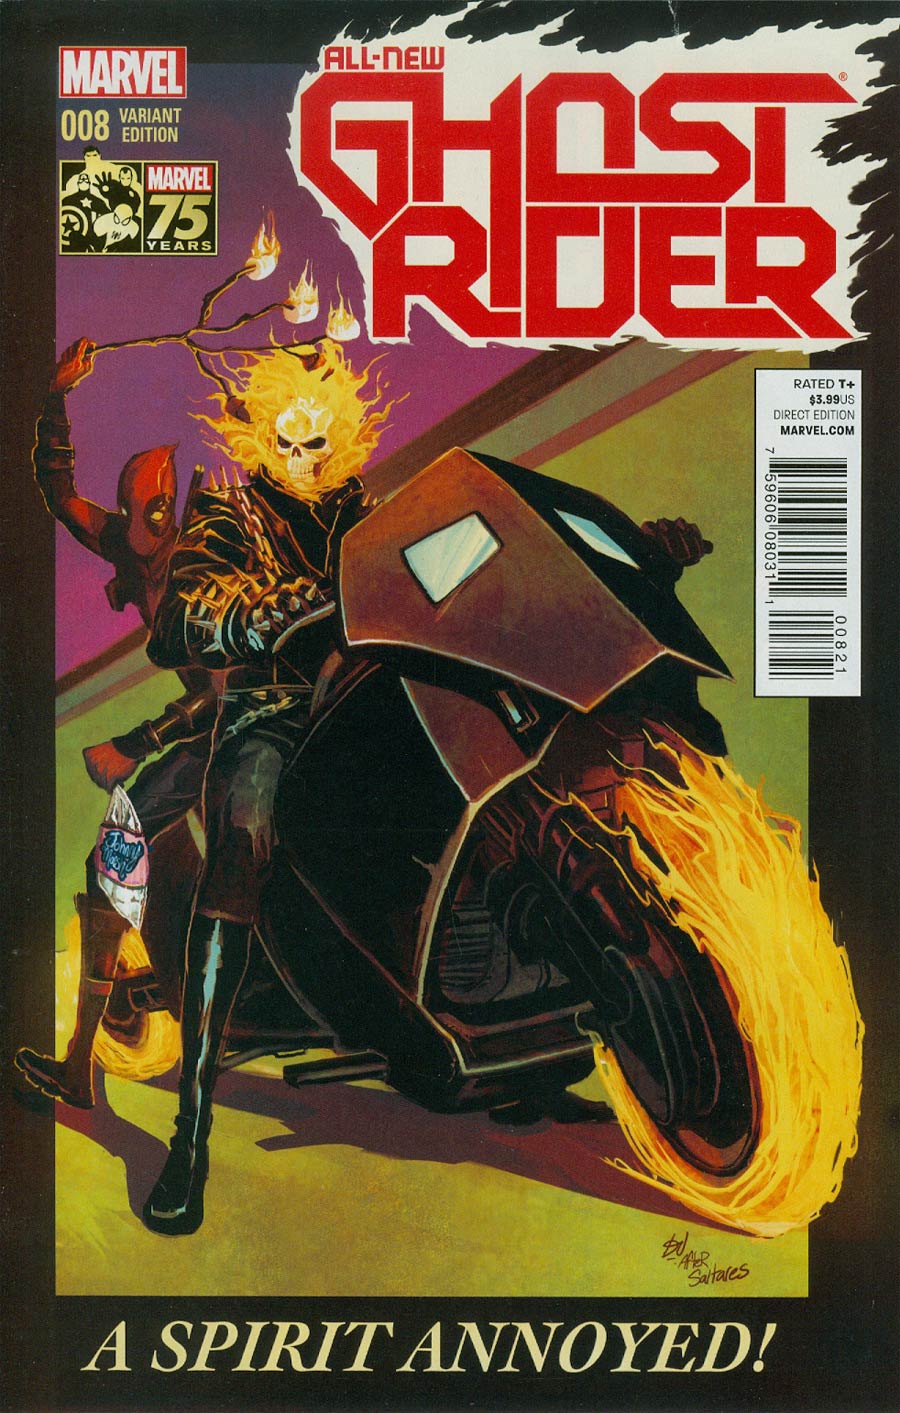 All-New Ghost Rider #8 Cover B Incentive Deadpool 75th Anniversary Photobomb Variant Cover